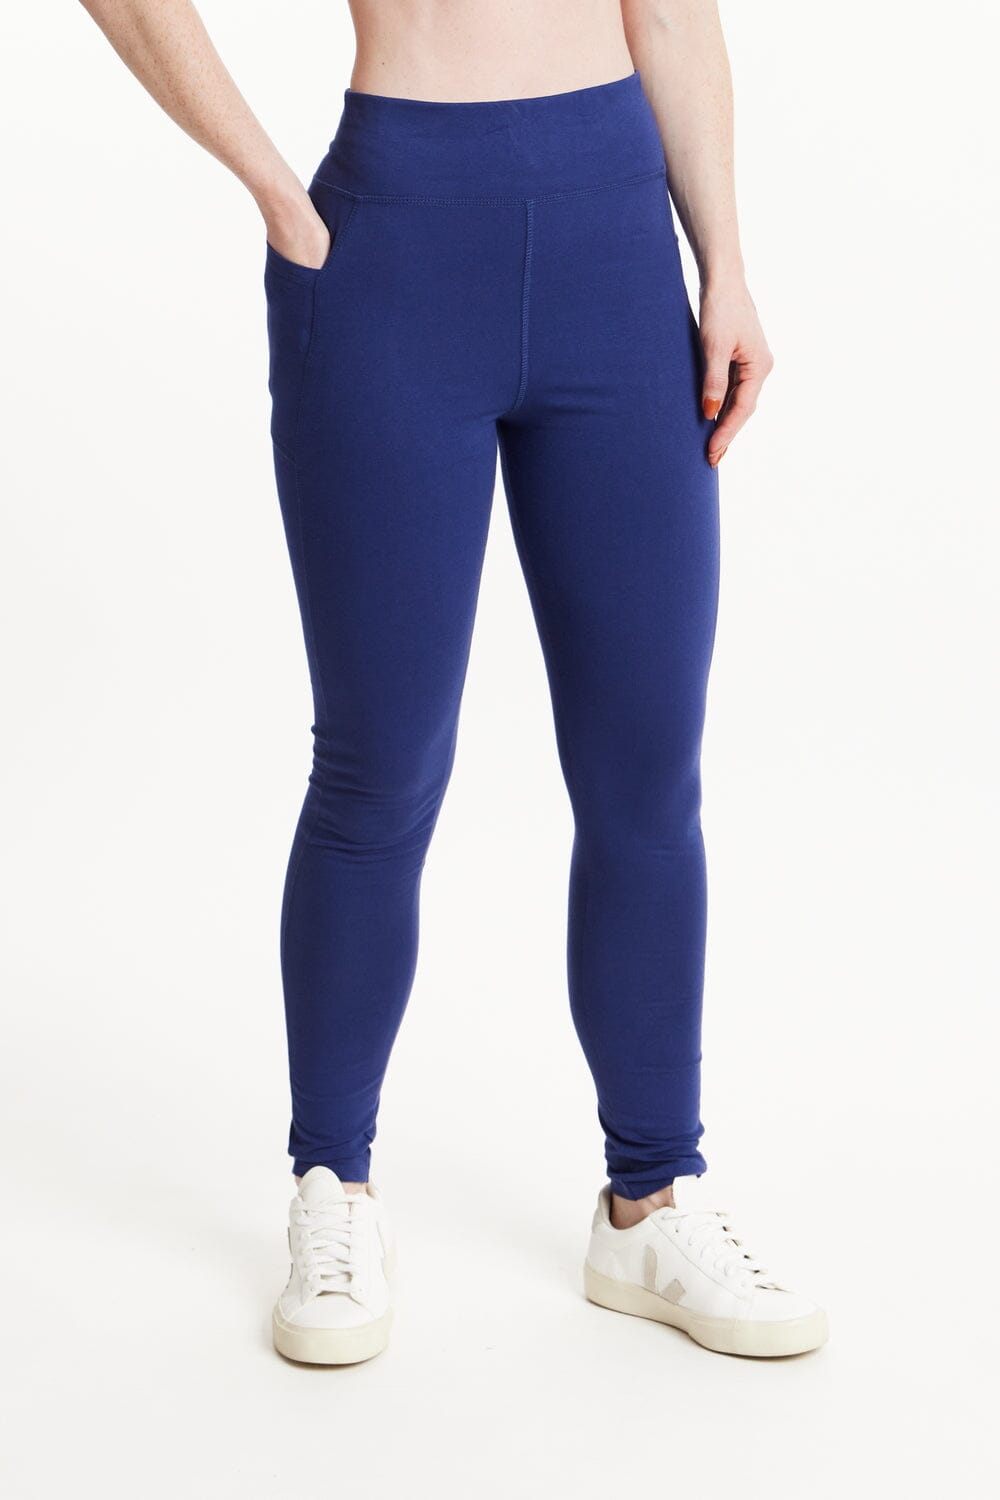 High Waisted Leggings - Society Boutique